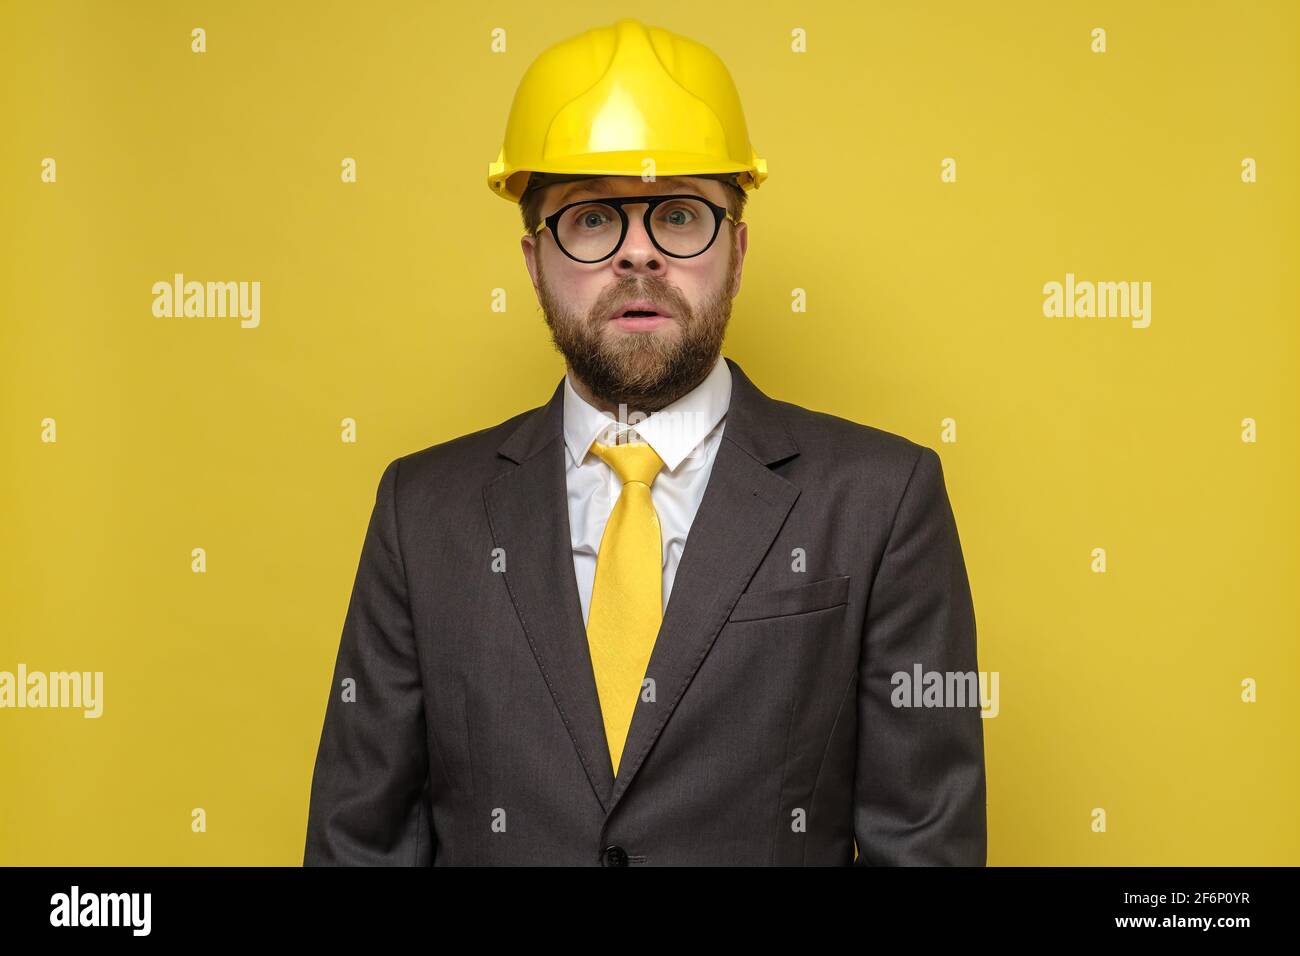 Surprised man in a construction helmet and a suit anxiously looks into the camera with big eyes and mouth open.  Stock Photo